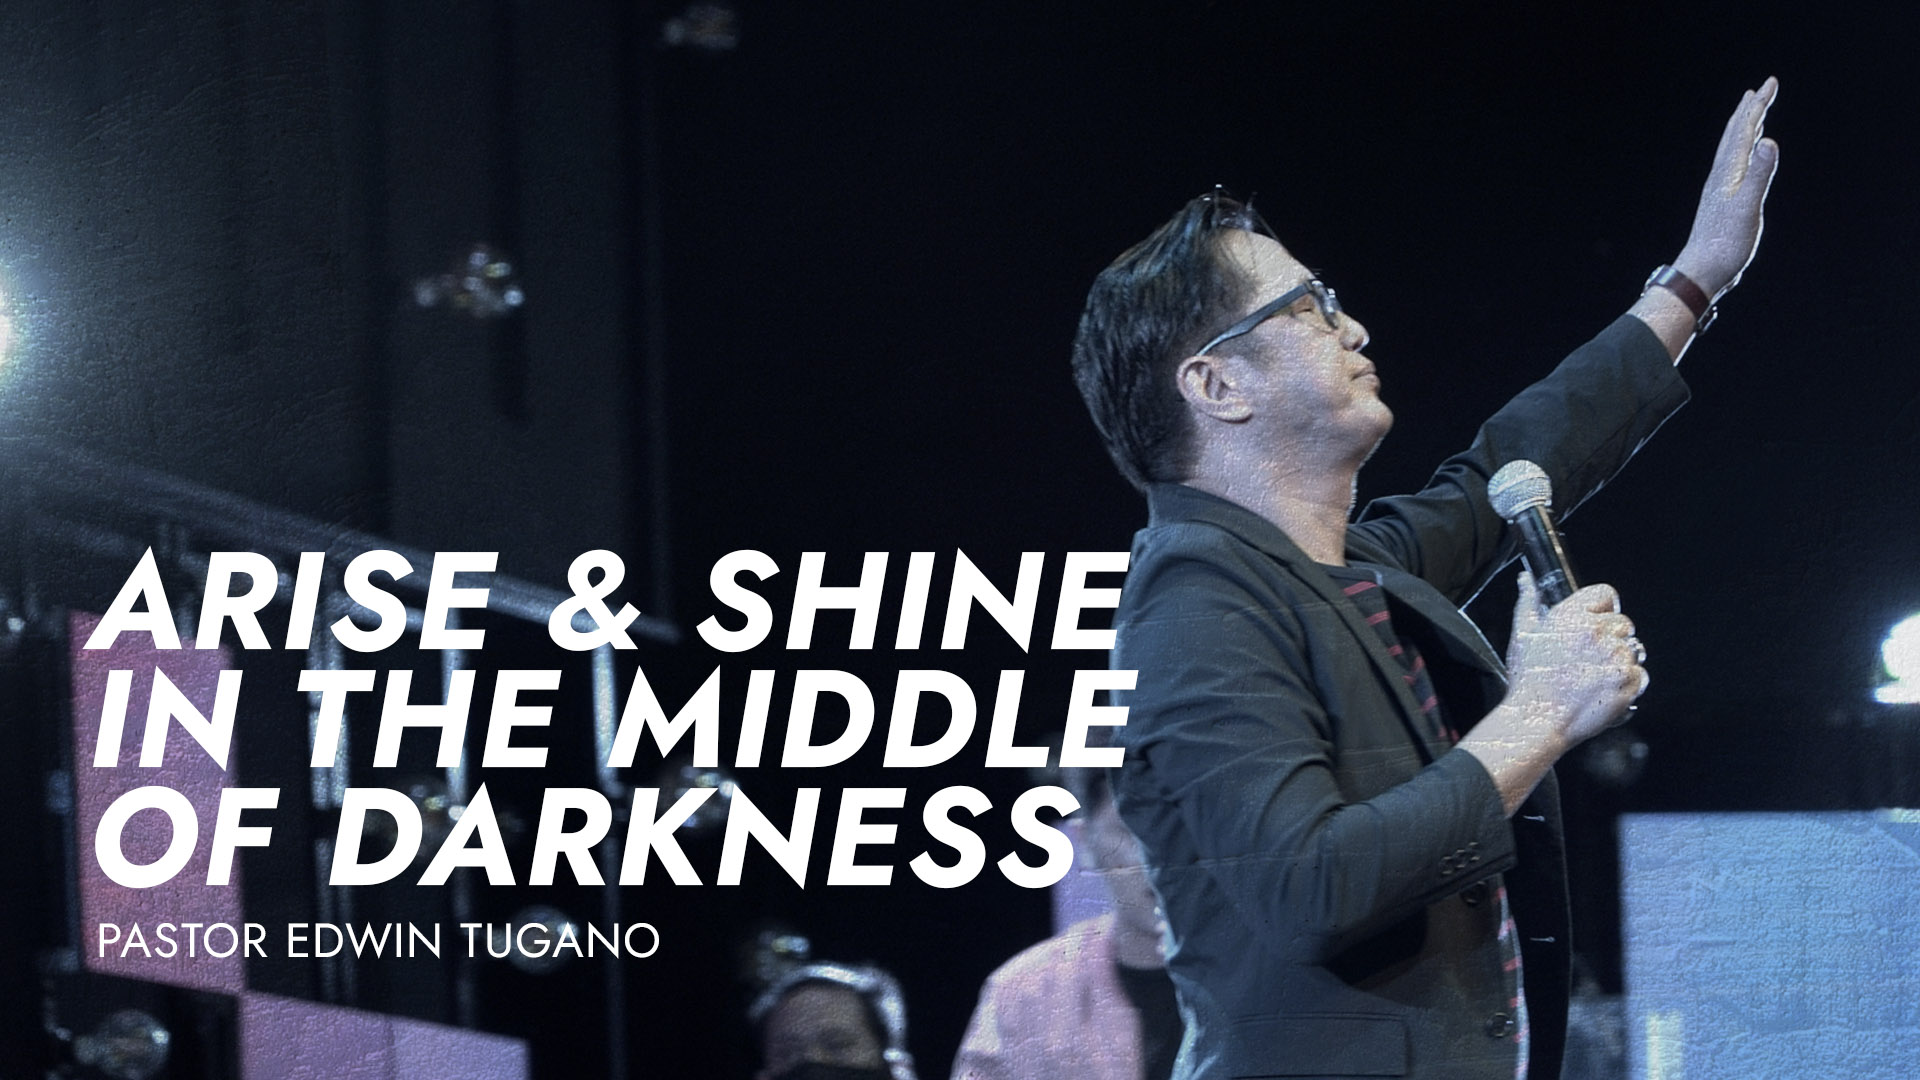 ARISE & SHINE IN THE MIDDLE OF DARKNESS Image